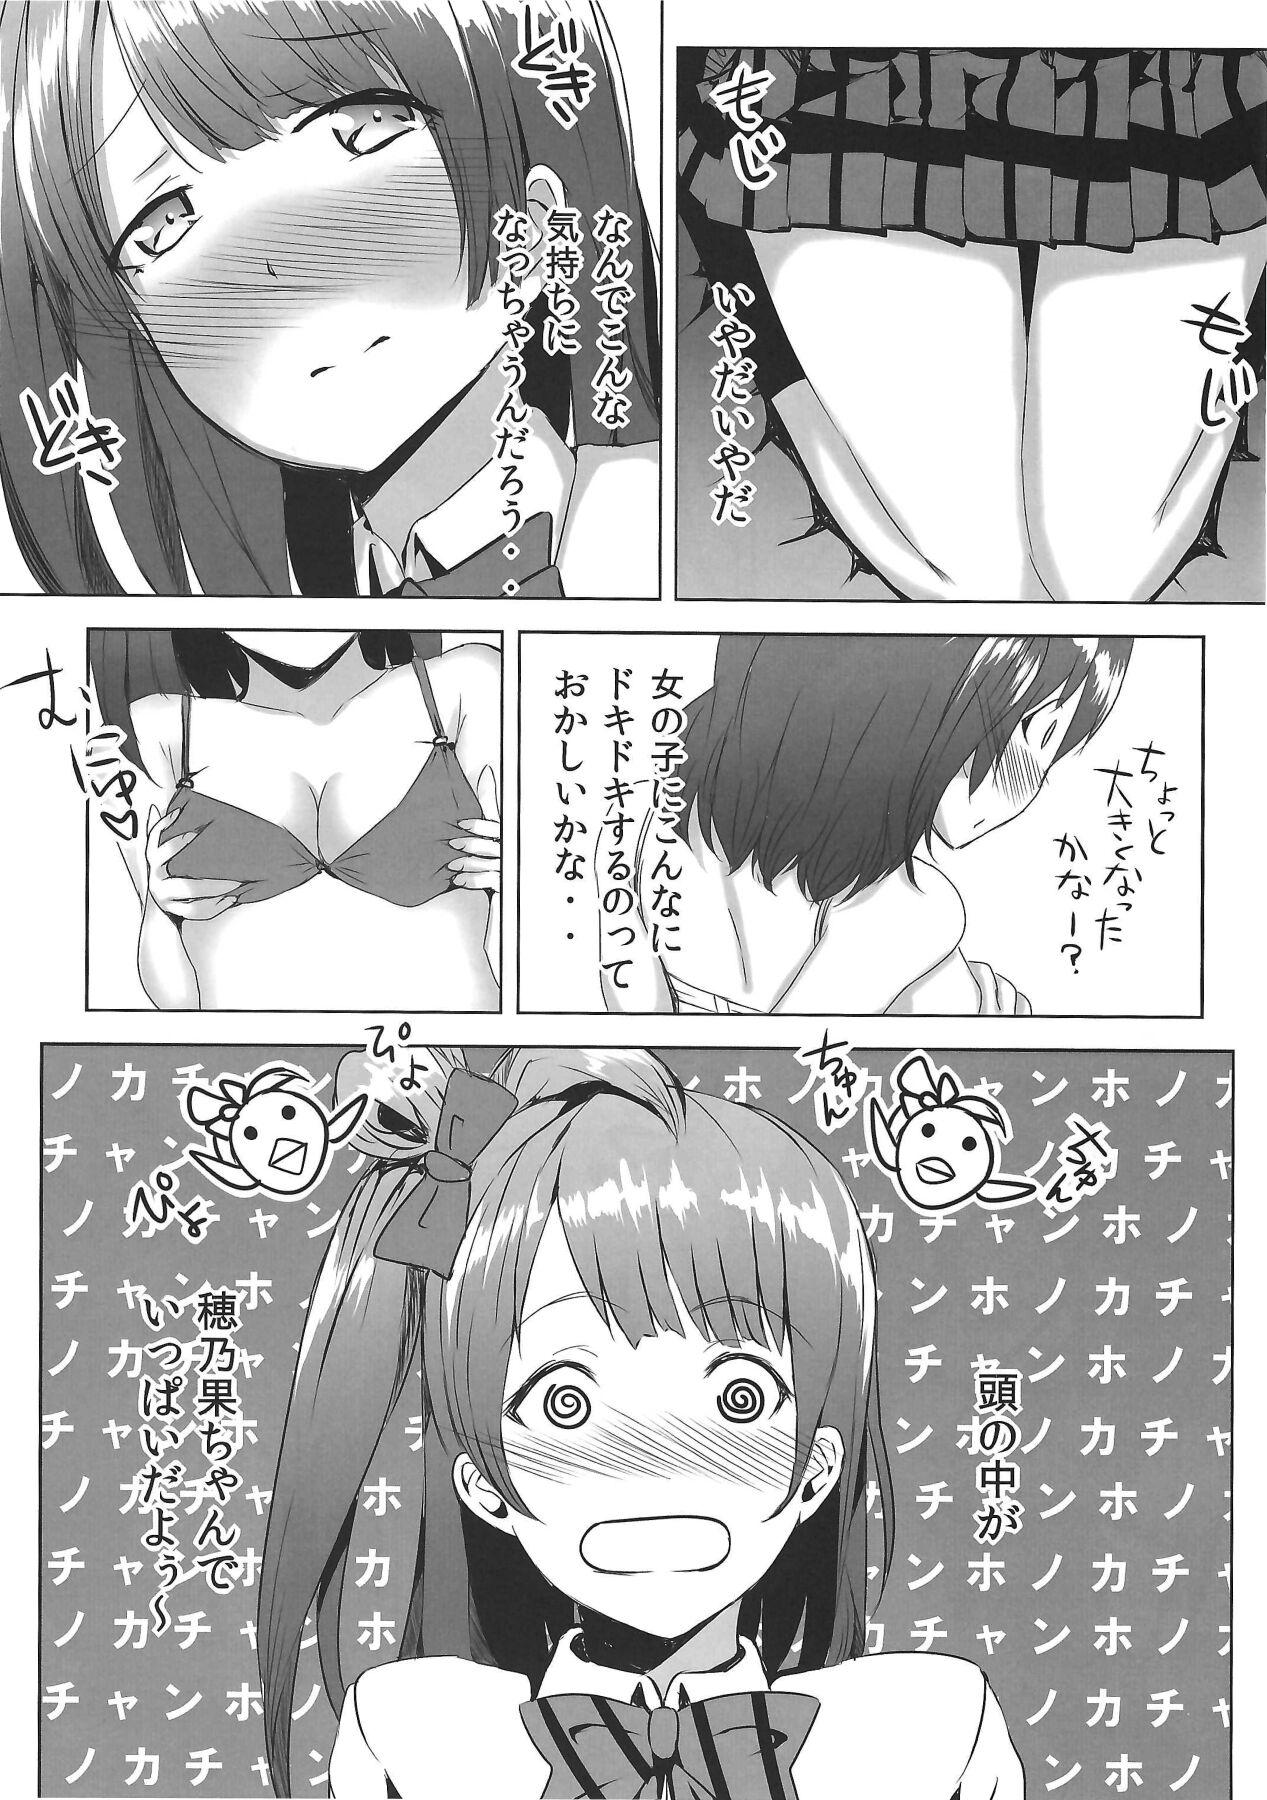 Sucking Dick LOVE!LOVE!FESTIVAL!! 3 - Love live Gaydudes - Page 4